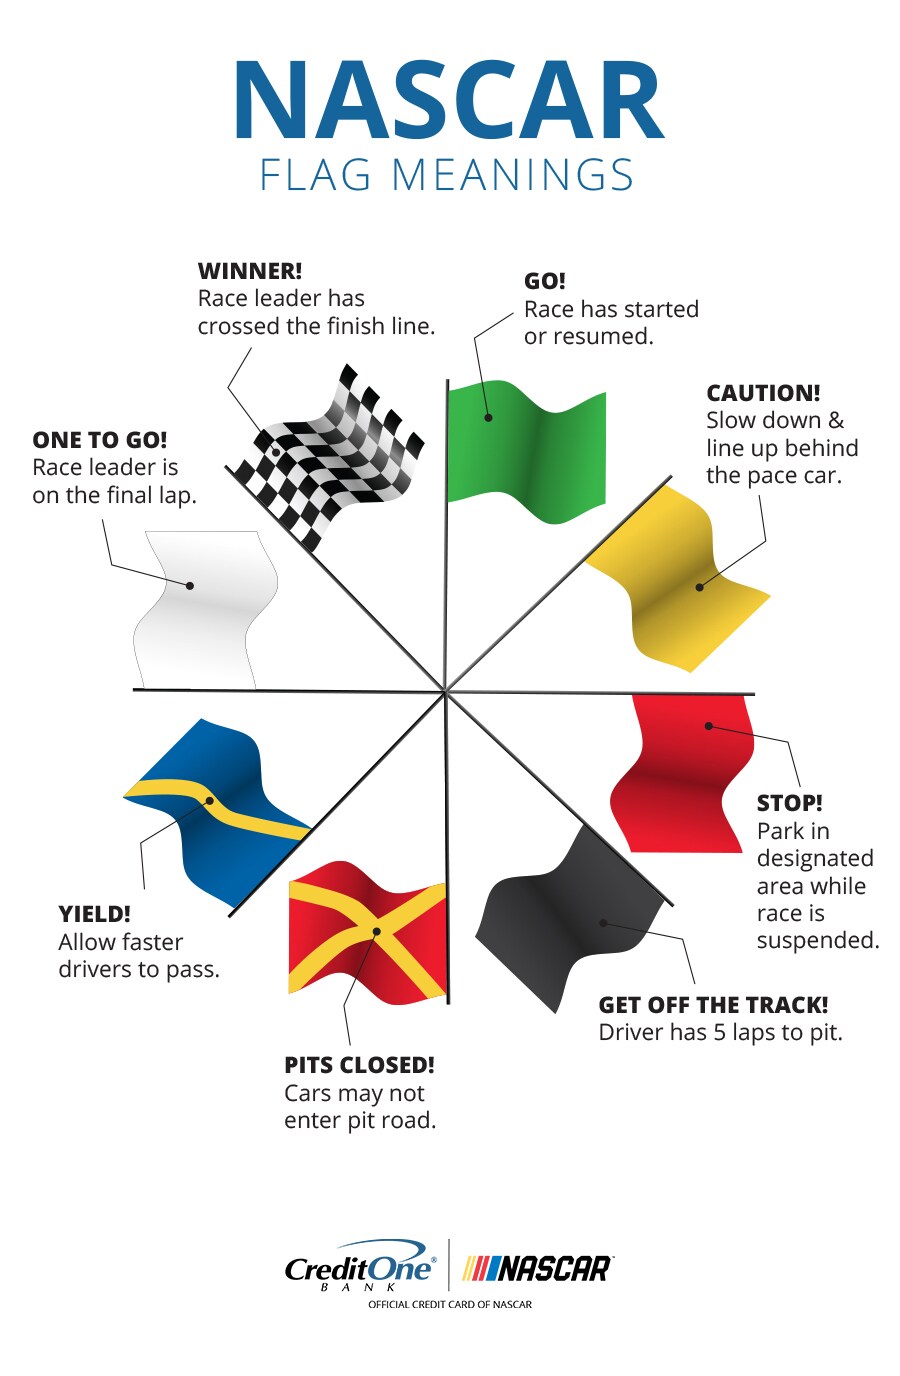 All in a Wave: The Meanings of 8 NASCAR Flags [Infographic]